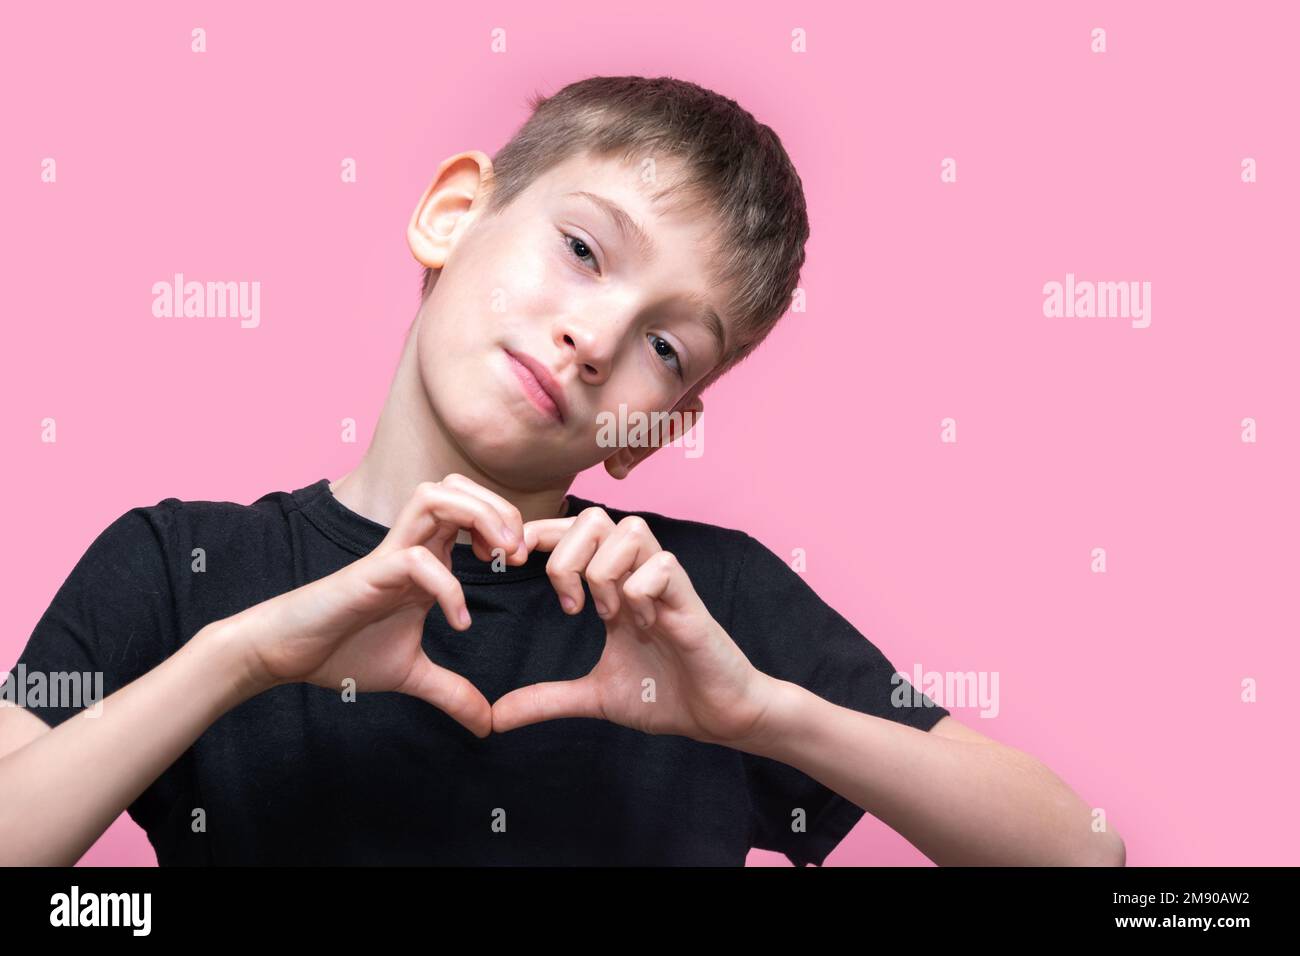 A teenage boy in a black T-shirt makes a heart shape with his hands and smiles on a pink background. Love, relationships. valentine's day. Stock Photo